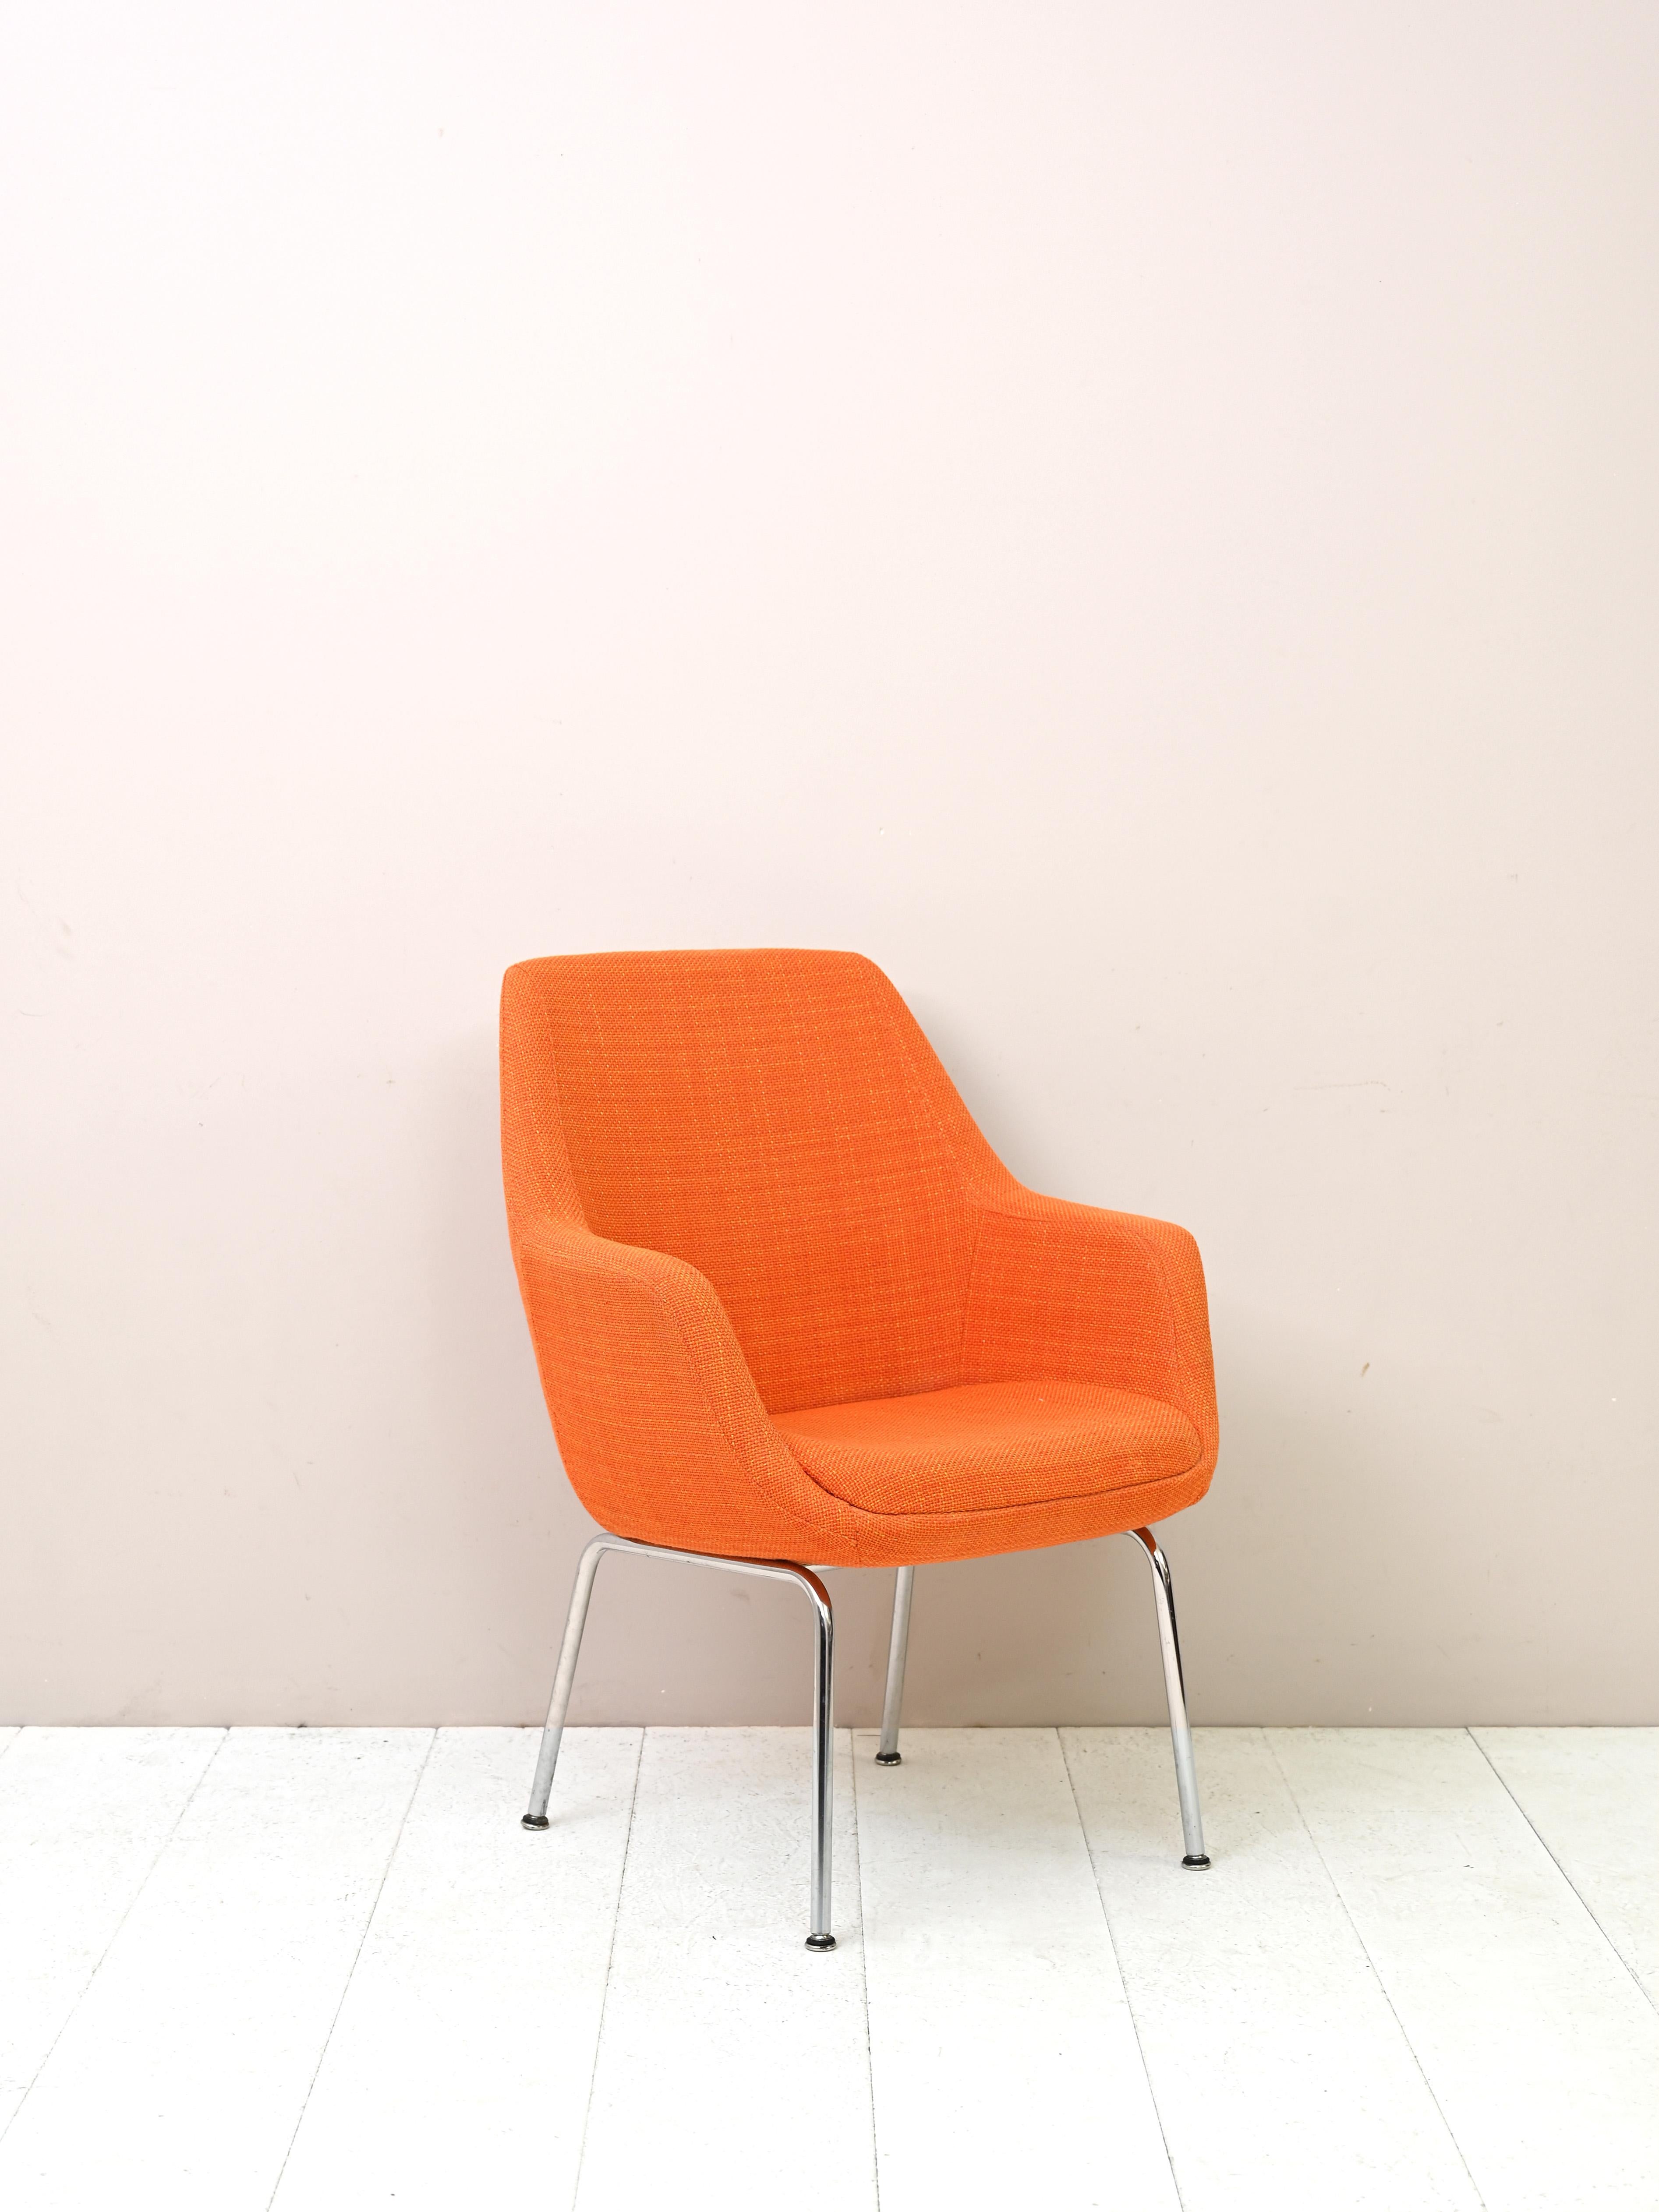 Original vintage chair with orange fabric.
A light and modern armchair with slender steel legs and an upholstered seat covered with
original vintage orange fabric.
Placed in a dining room or bedroom it will add character to the room.

AC474.